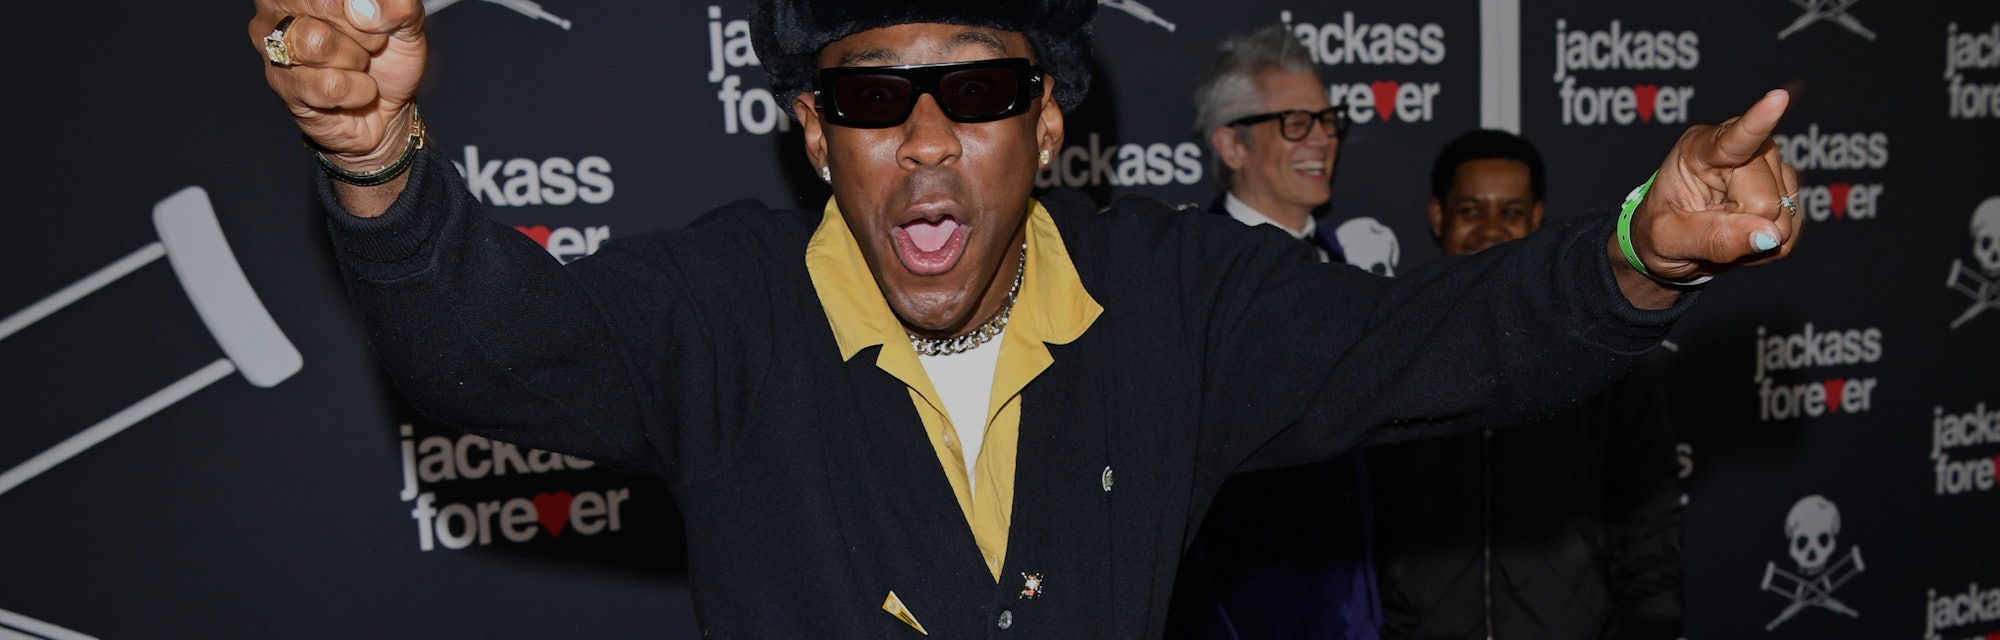 HOLLYWOOD, CALIFORNIA - FEBRUARY 01: Tyler, the Creator attends the U.S. Premiere of "Jackass Foreve...